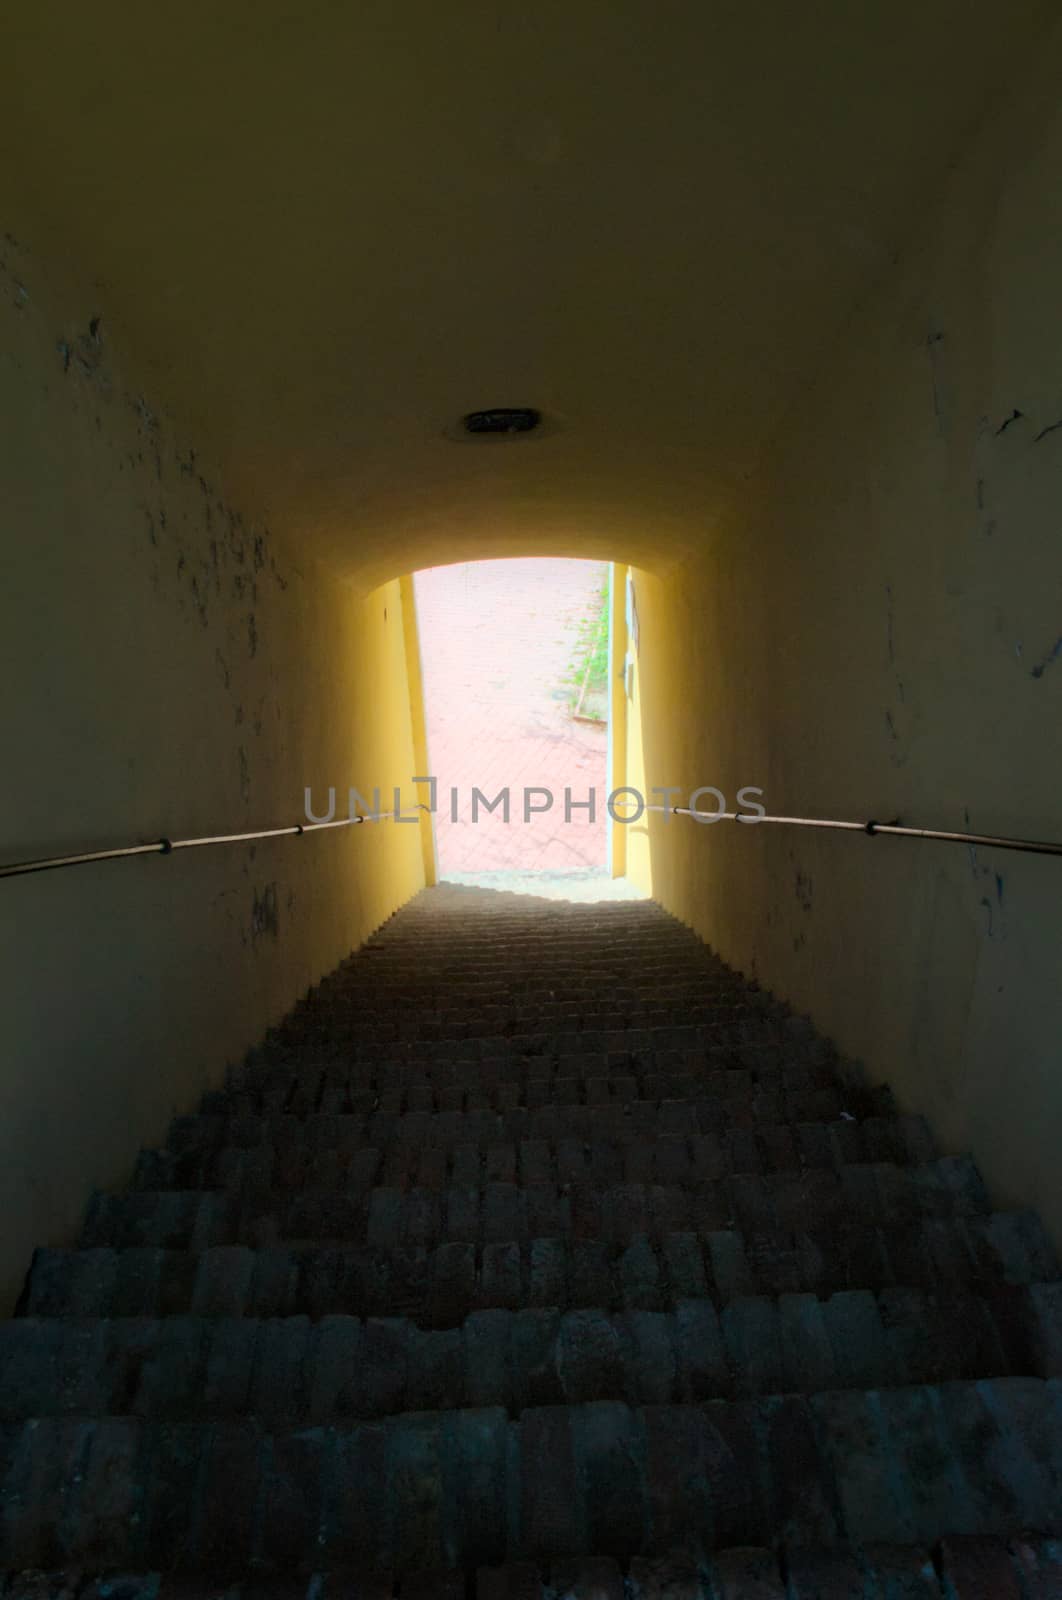 Light at the end of stairways tunnel by sheriffkule